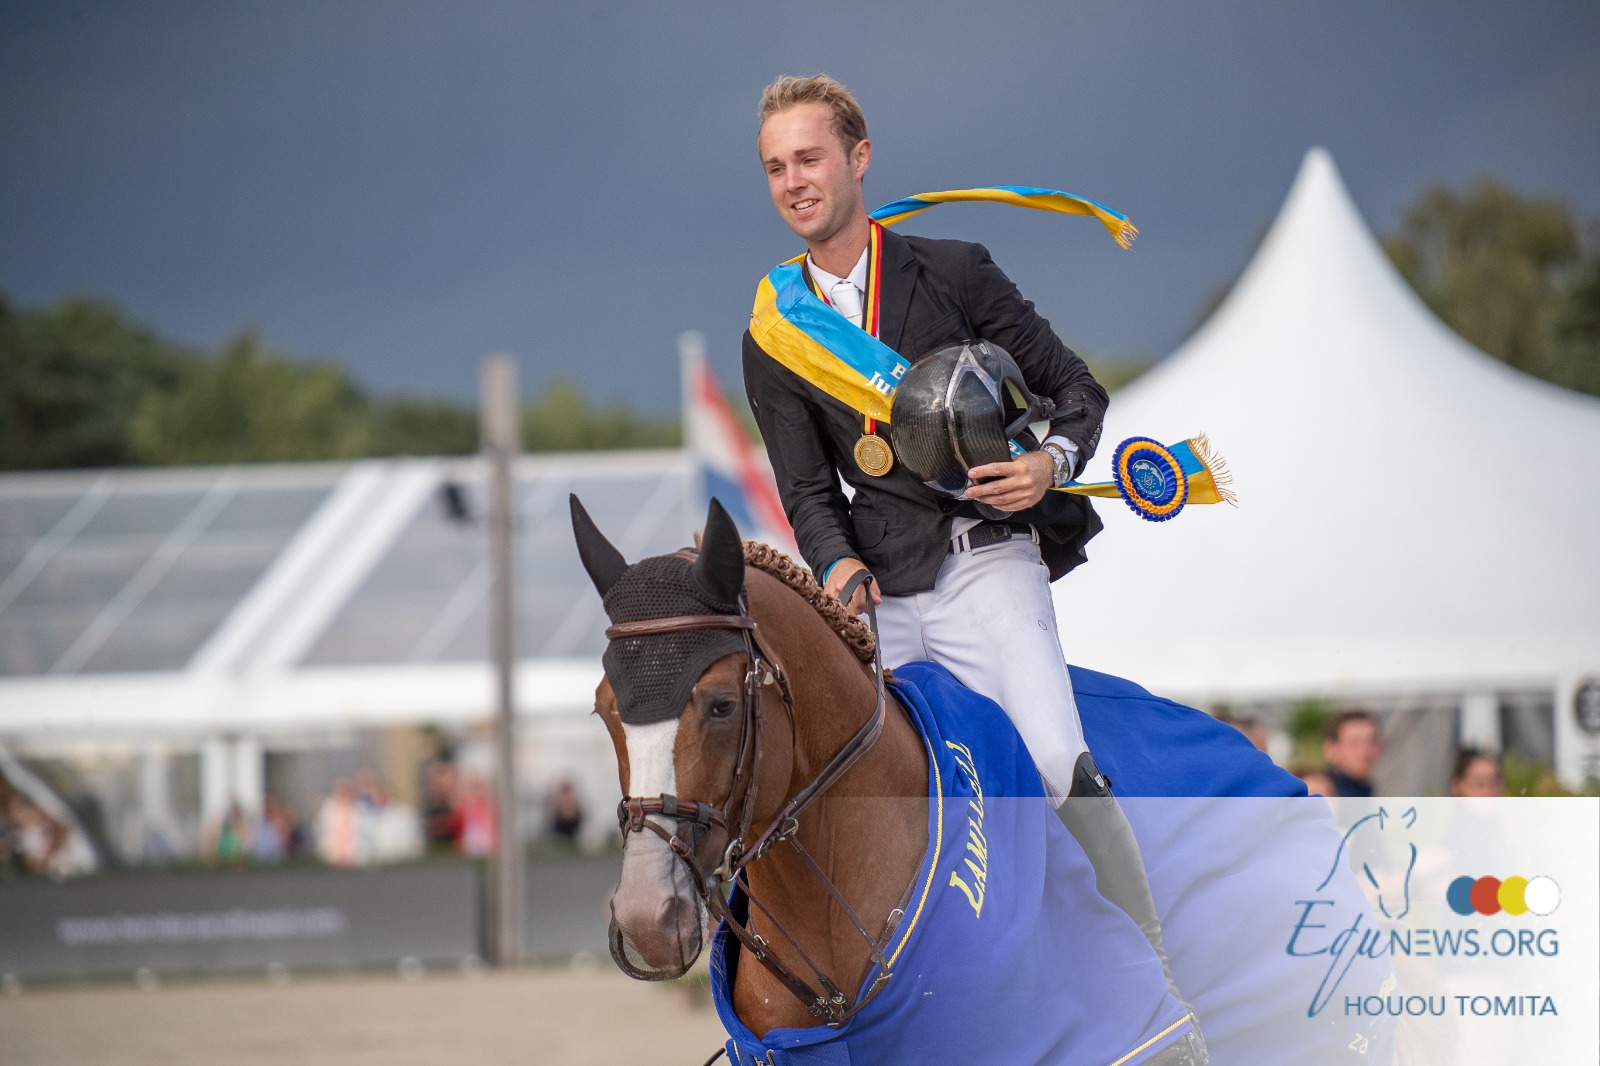 Joris Van Dijck secures stallion for Gilles Thomas: "Ermitage Kalone gives us so much Joy, that's not for sale!"